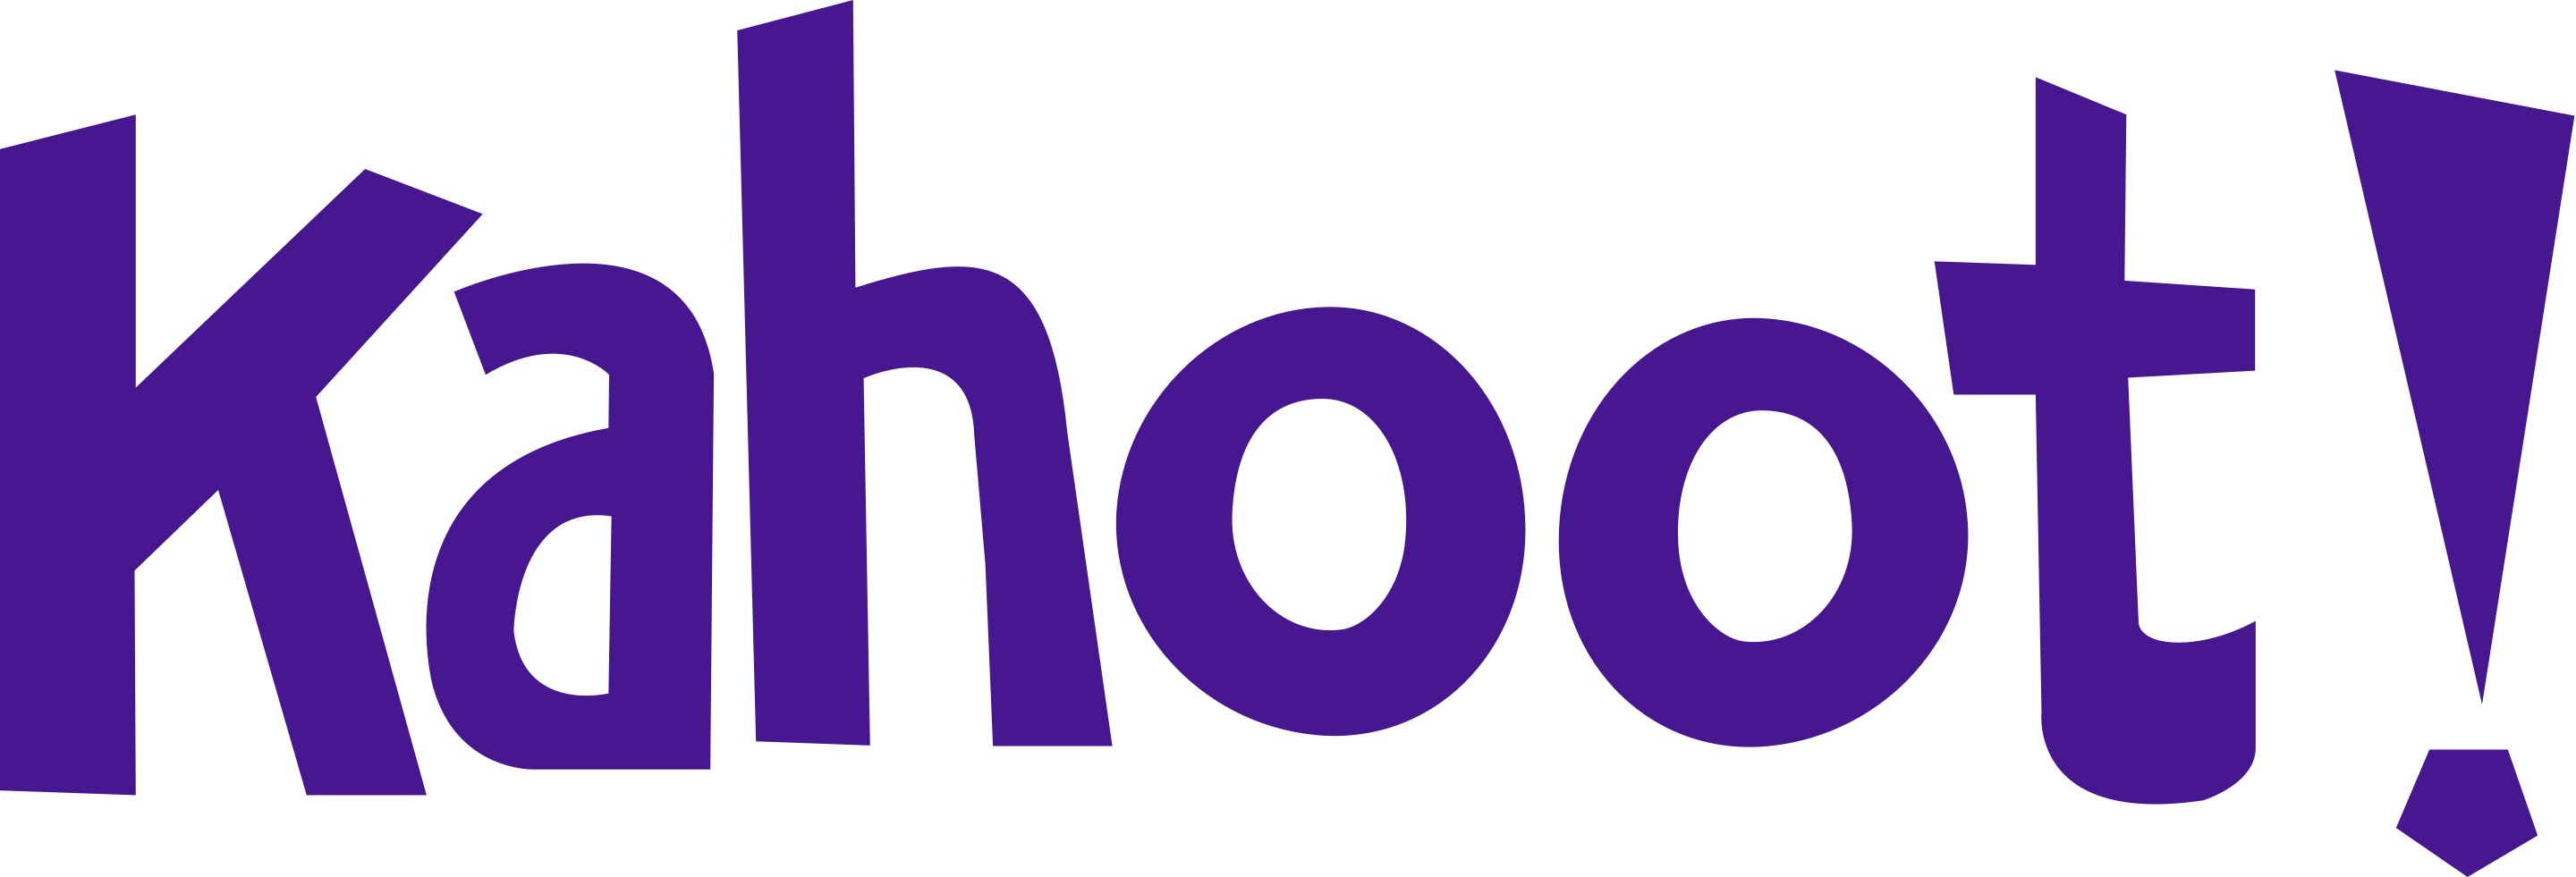 How to Create a Kahoot Game: Step-by-Step Guide